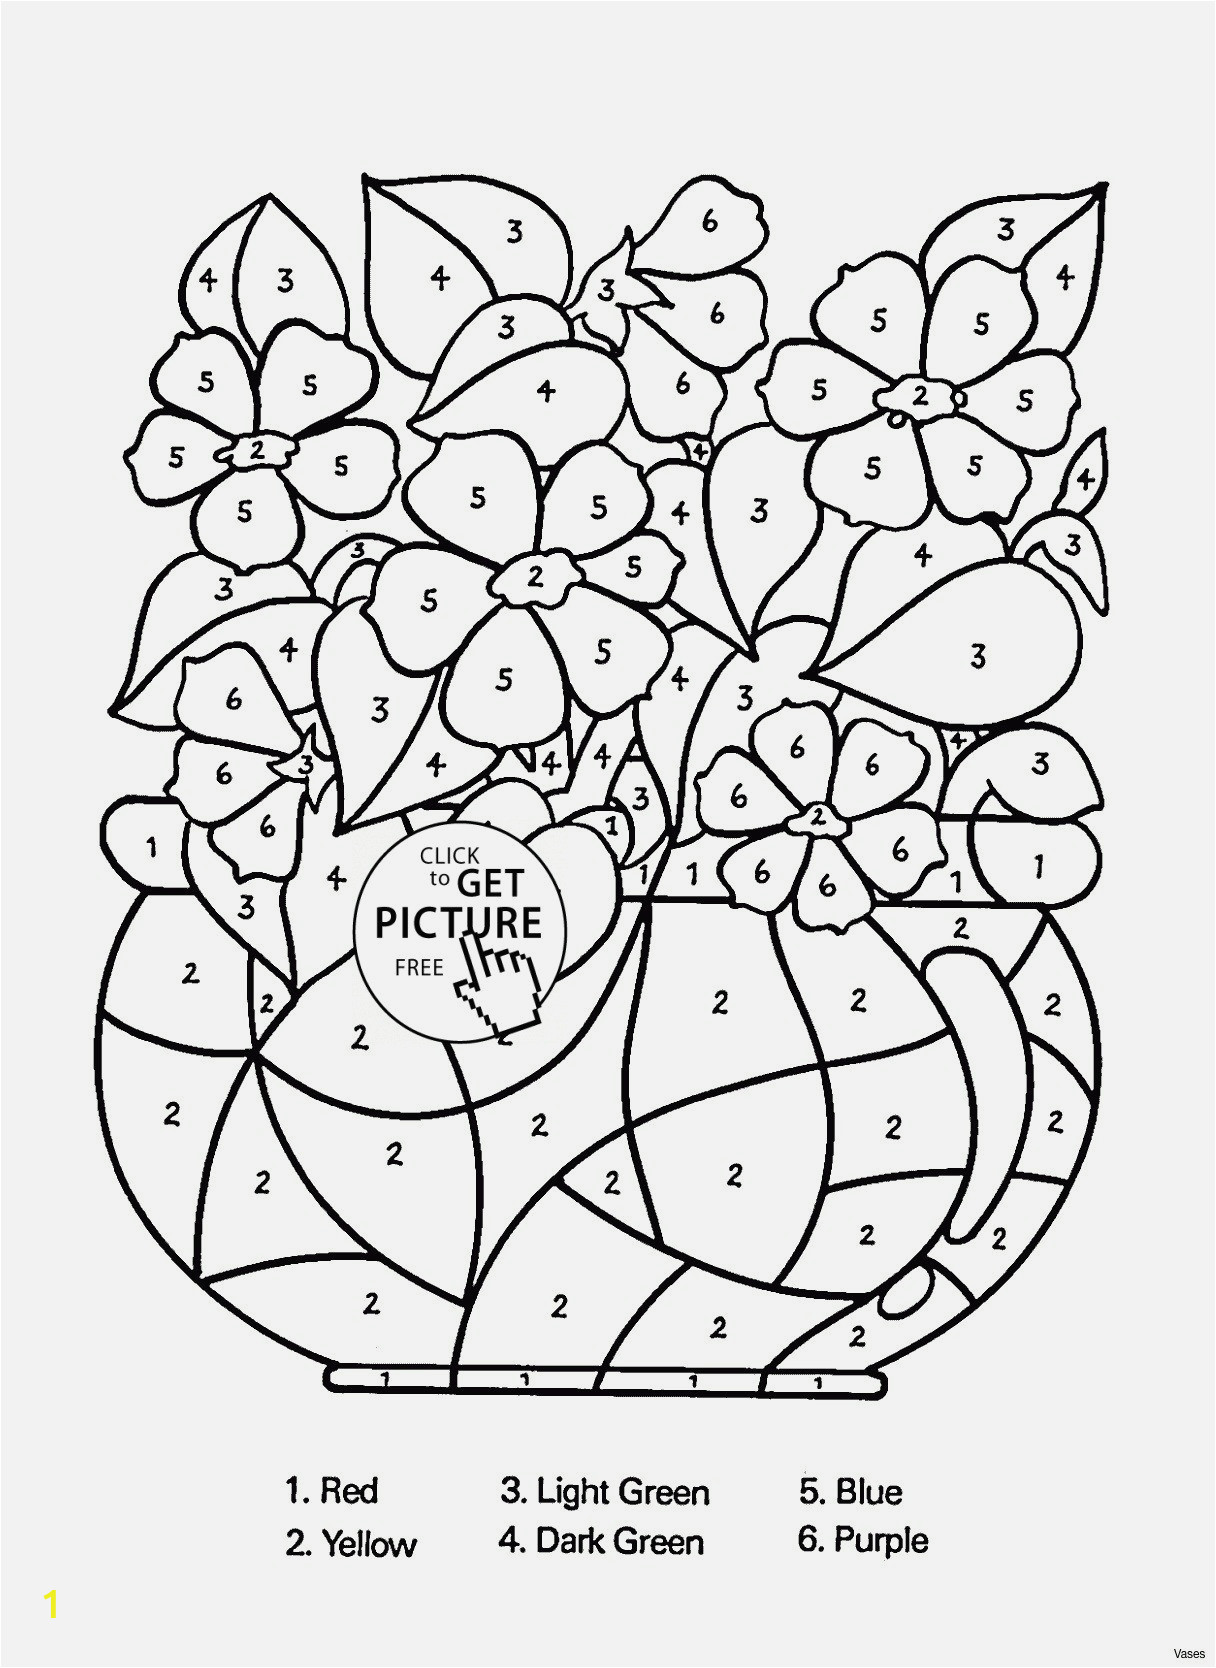 Coloring Pages for Kids Pdf New Coloring Pages Free Bird Unique Parrot Elegant